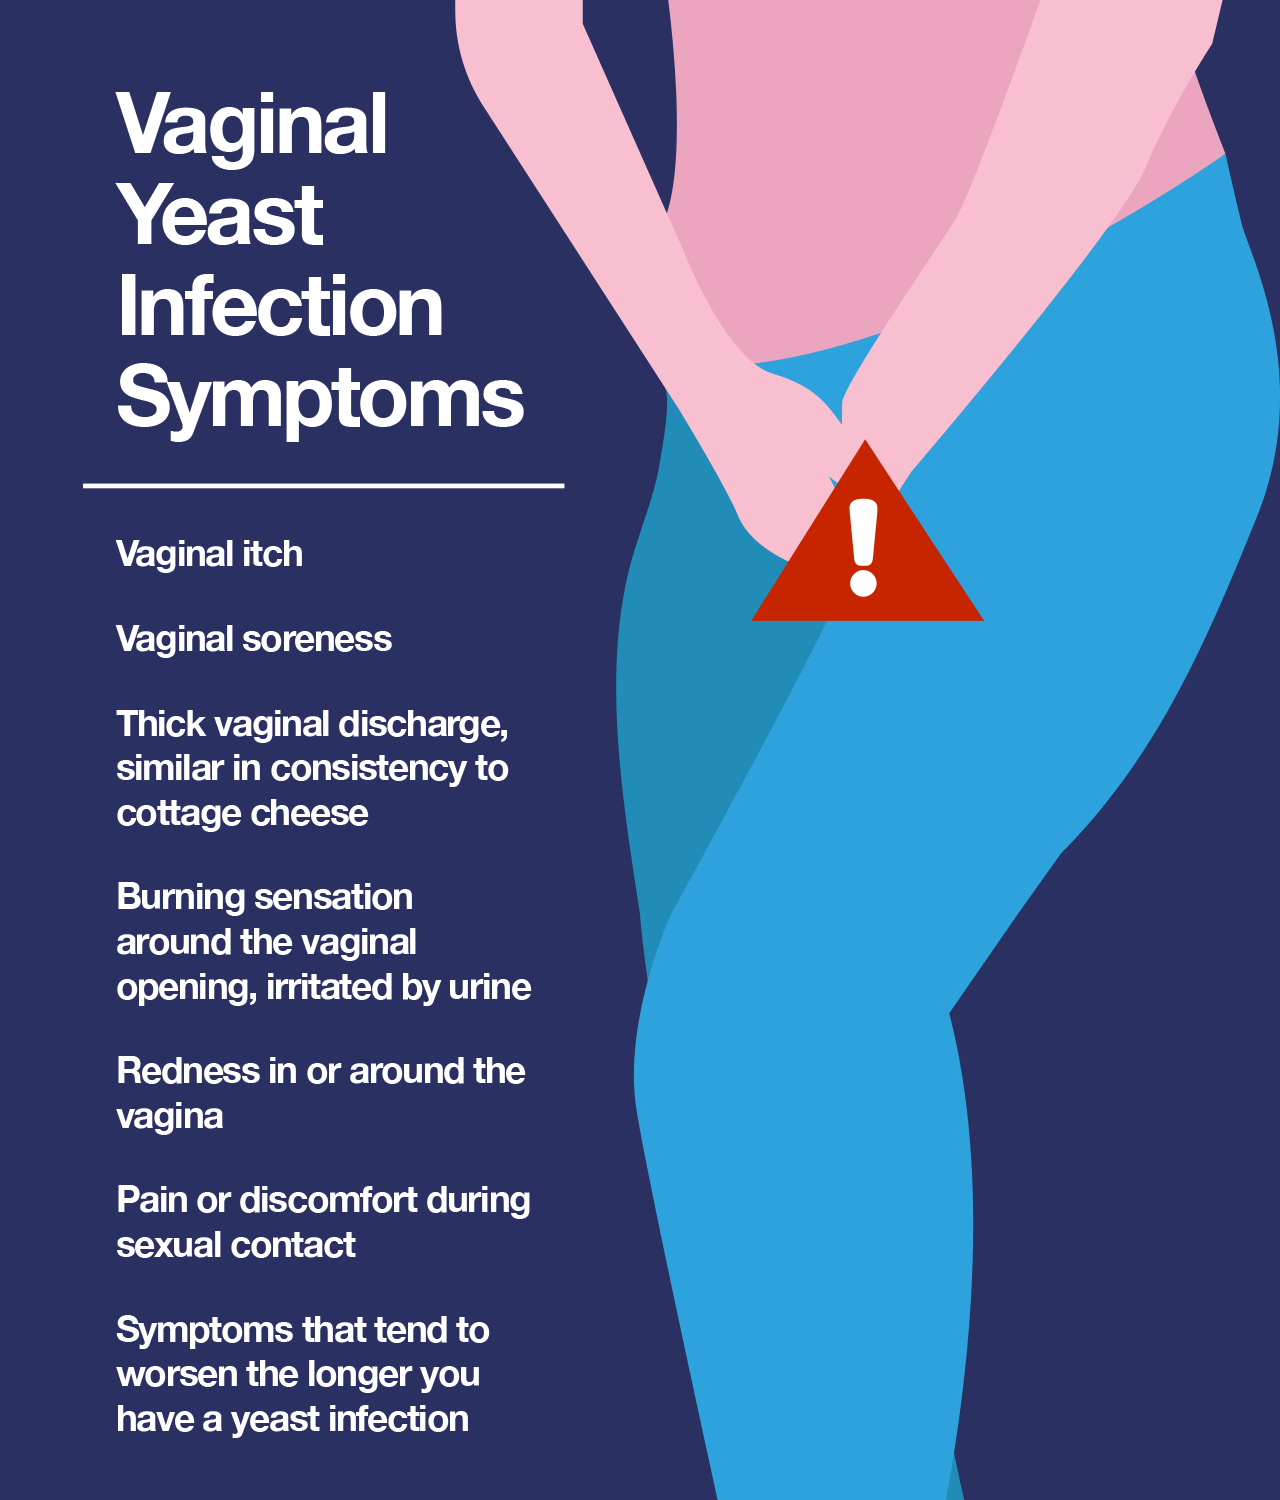 Vaginal Yeast Infection Symptoms, Remedies, Treatments, Prevention